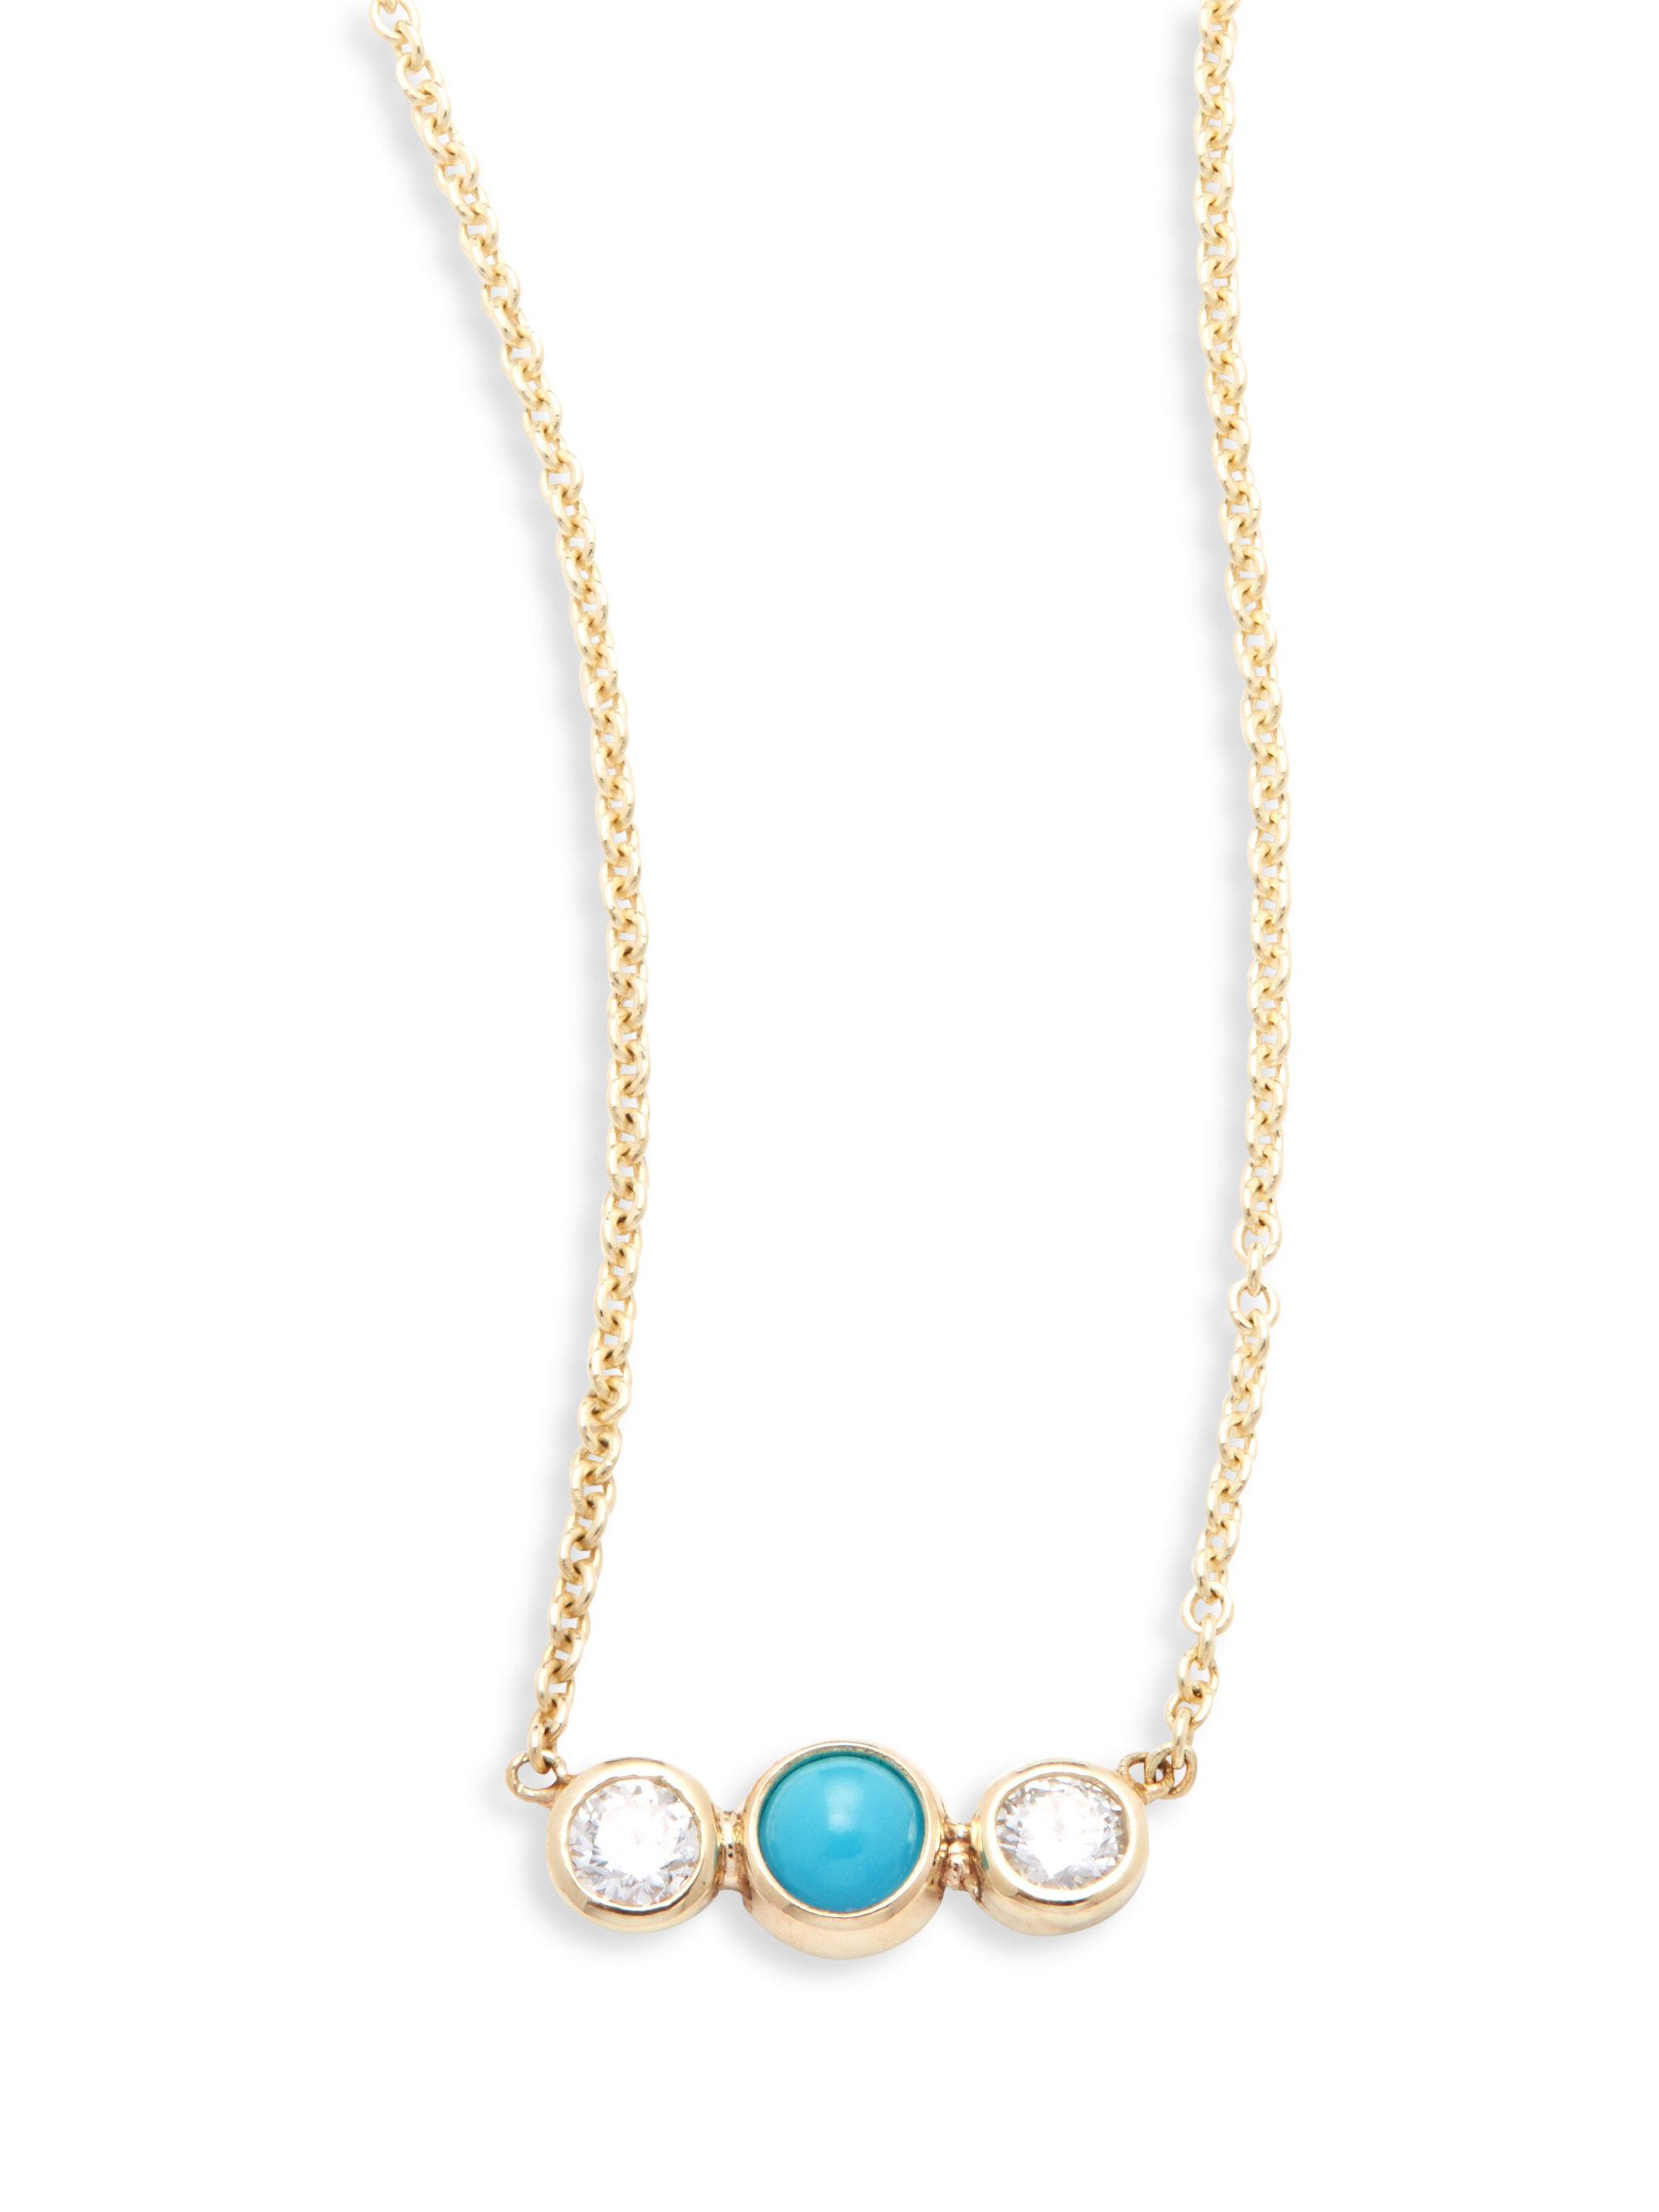 Zoe Chicco Diamond, Turquoise & 14k Yellow Gold Pendant Necklace in ...